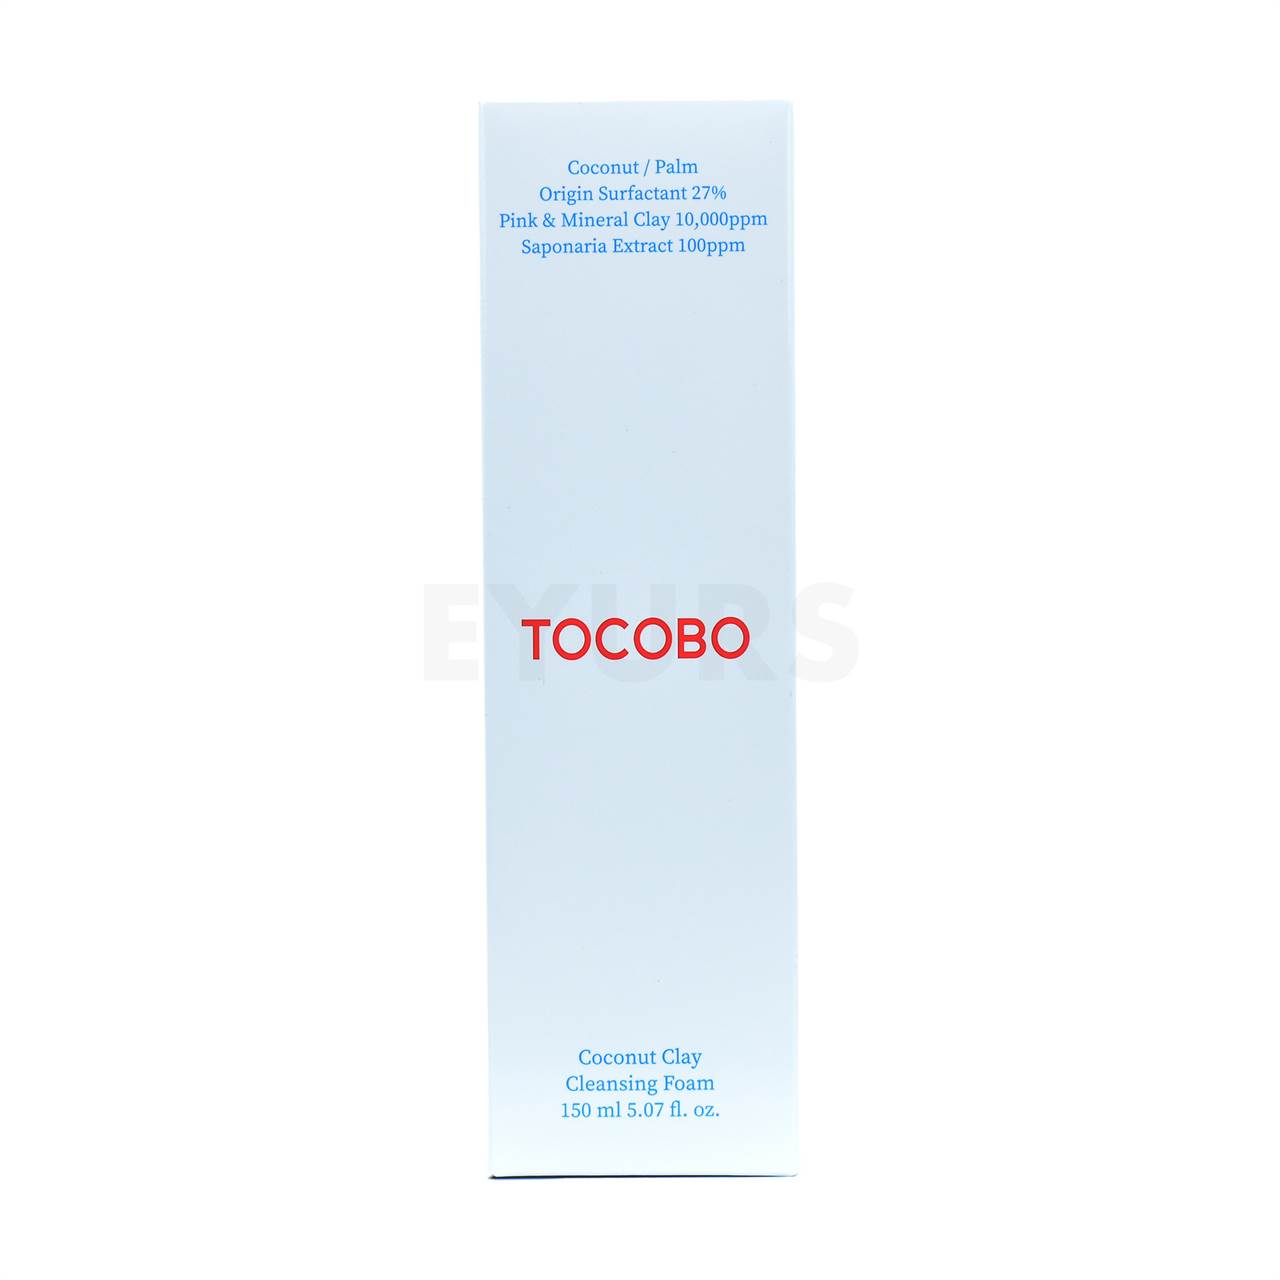 tocobo coconut clay cleansing foam front side packaging